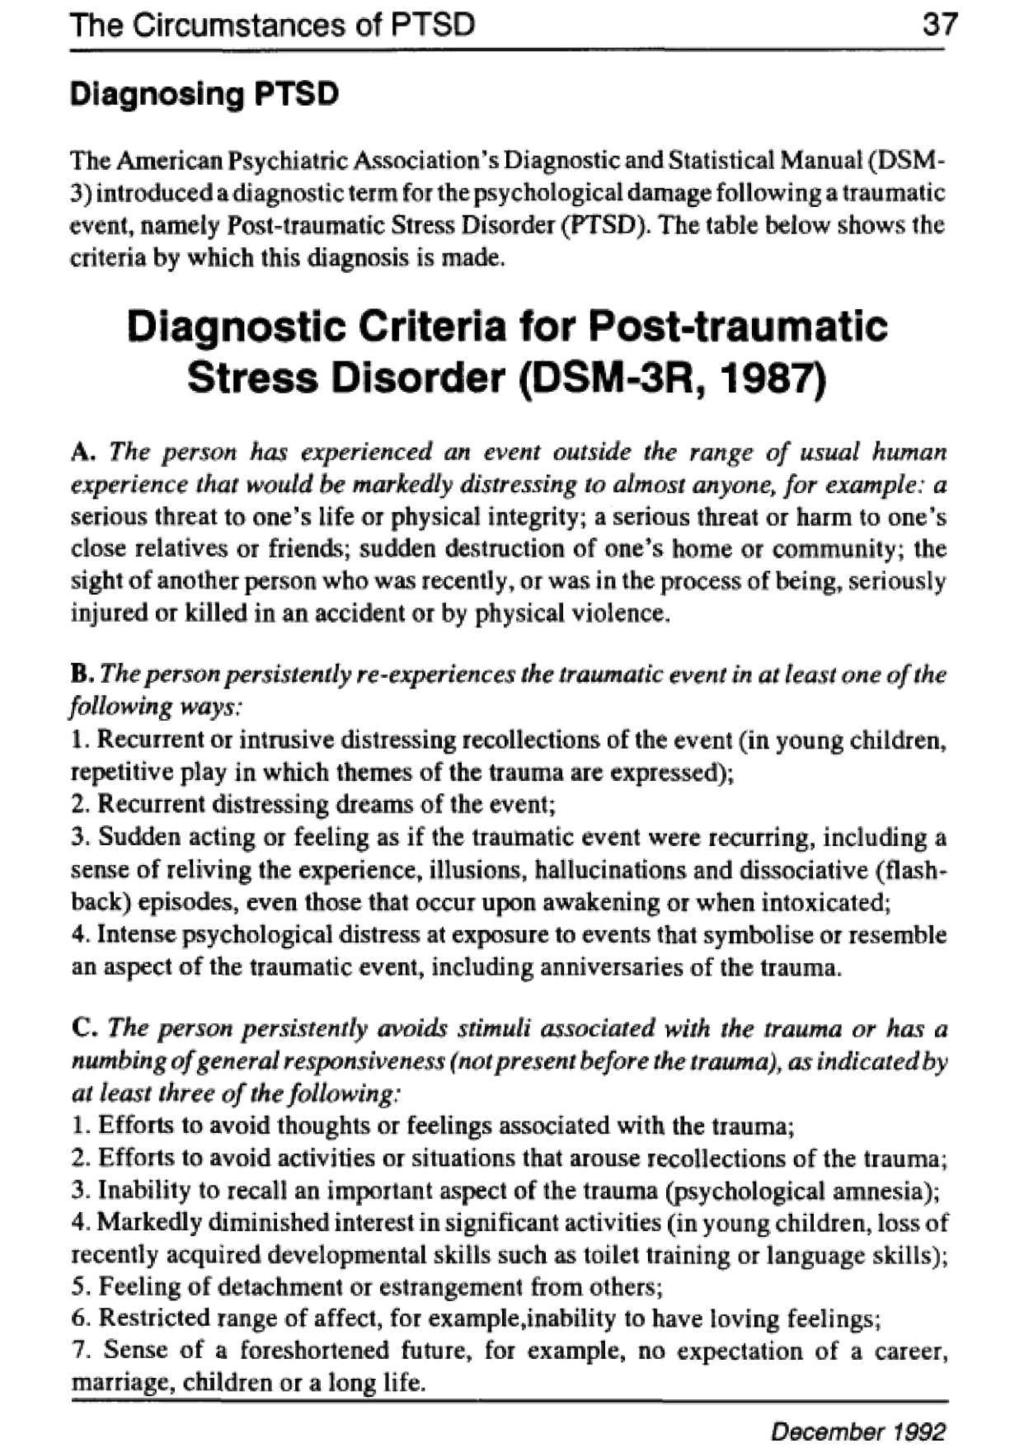 The Circumstances of PTSD 37 December 1992 Diagnosing PTSD The American Psychiatric Association's Diagnostic and Statistical Manual (DSM- 3) introduced a diagnostic term for the psychological damage